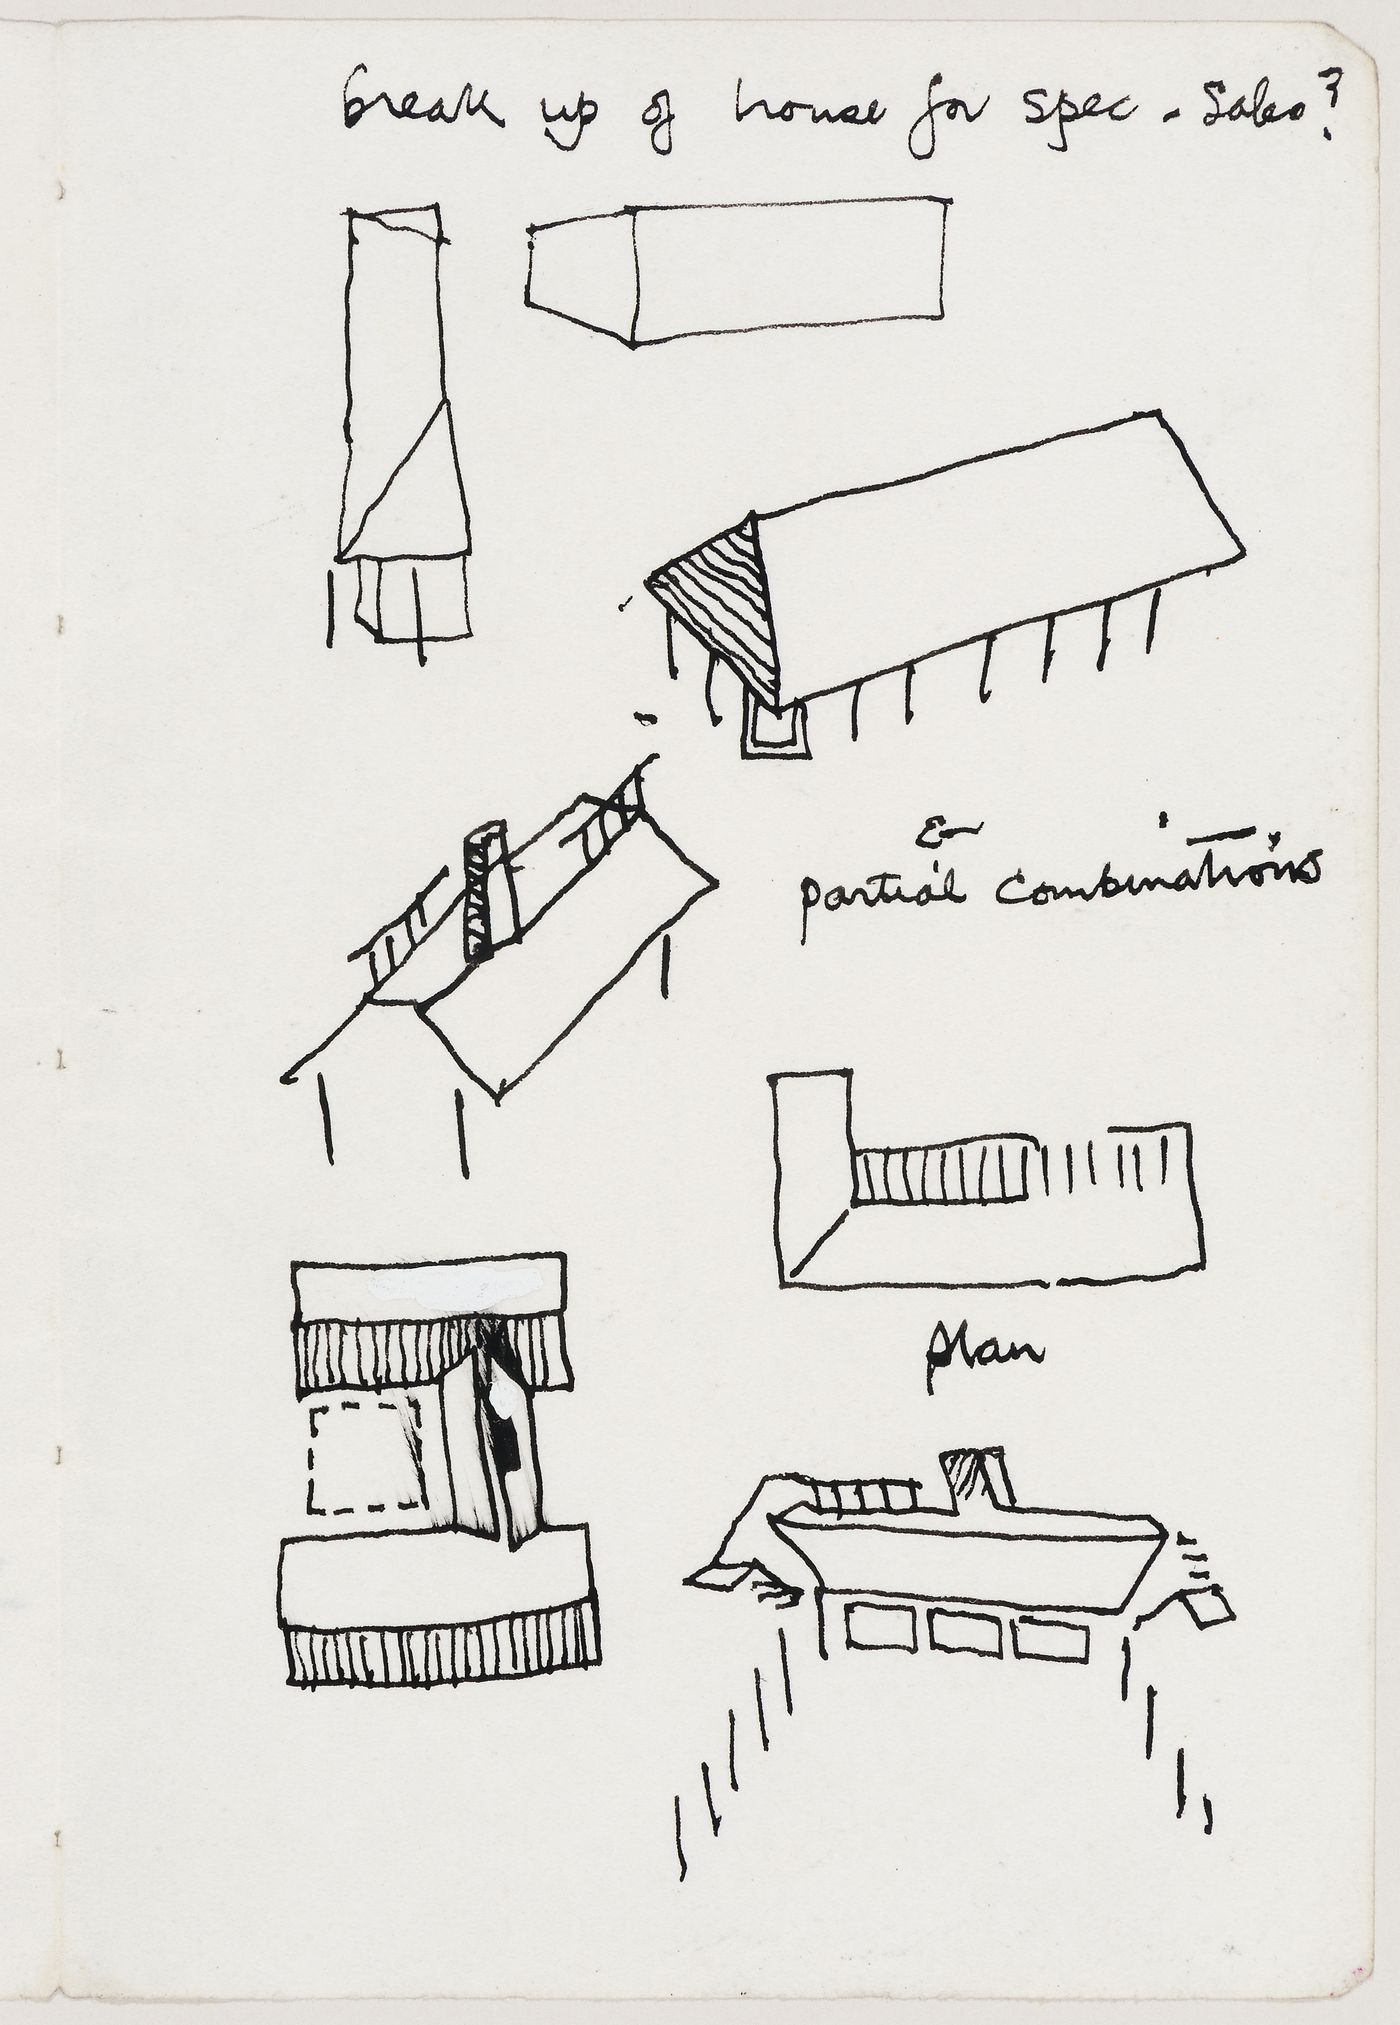 Perthut House: sketches showing potential to break up and combine elements